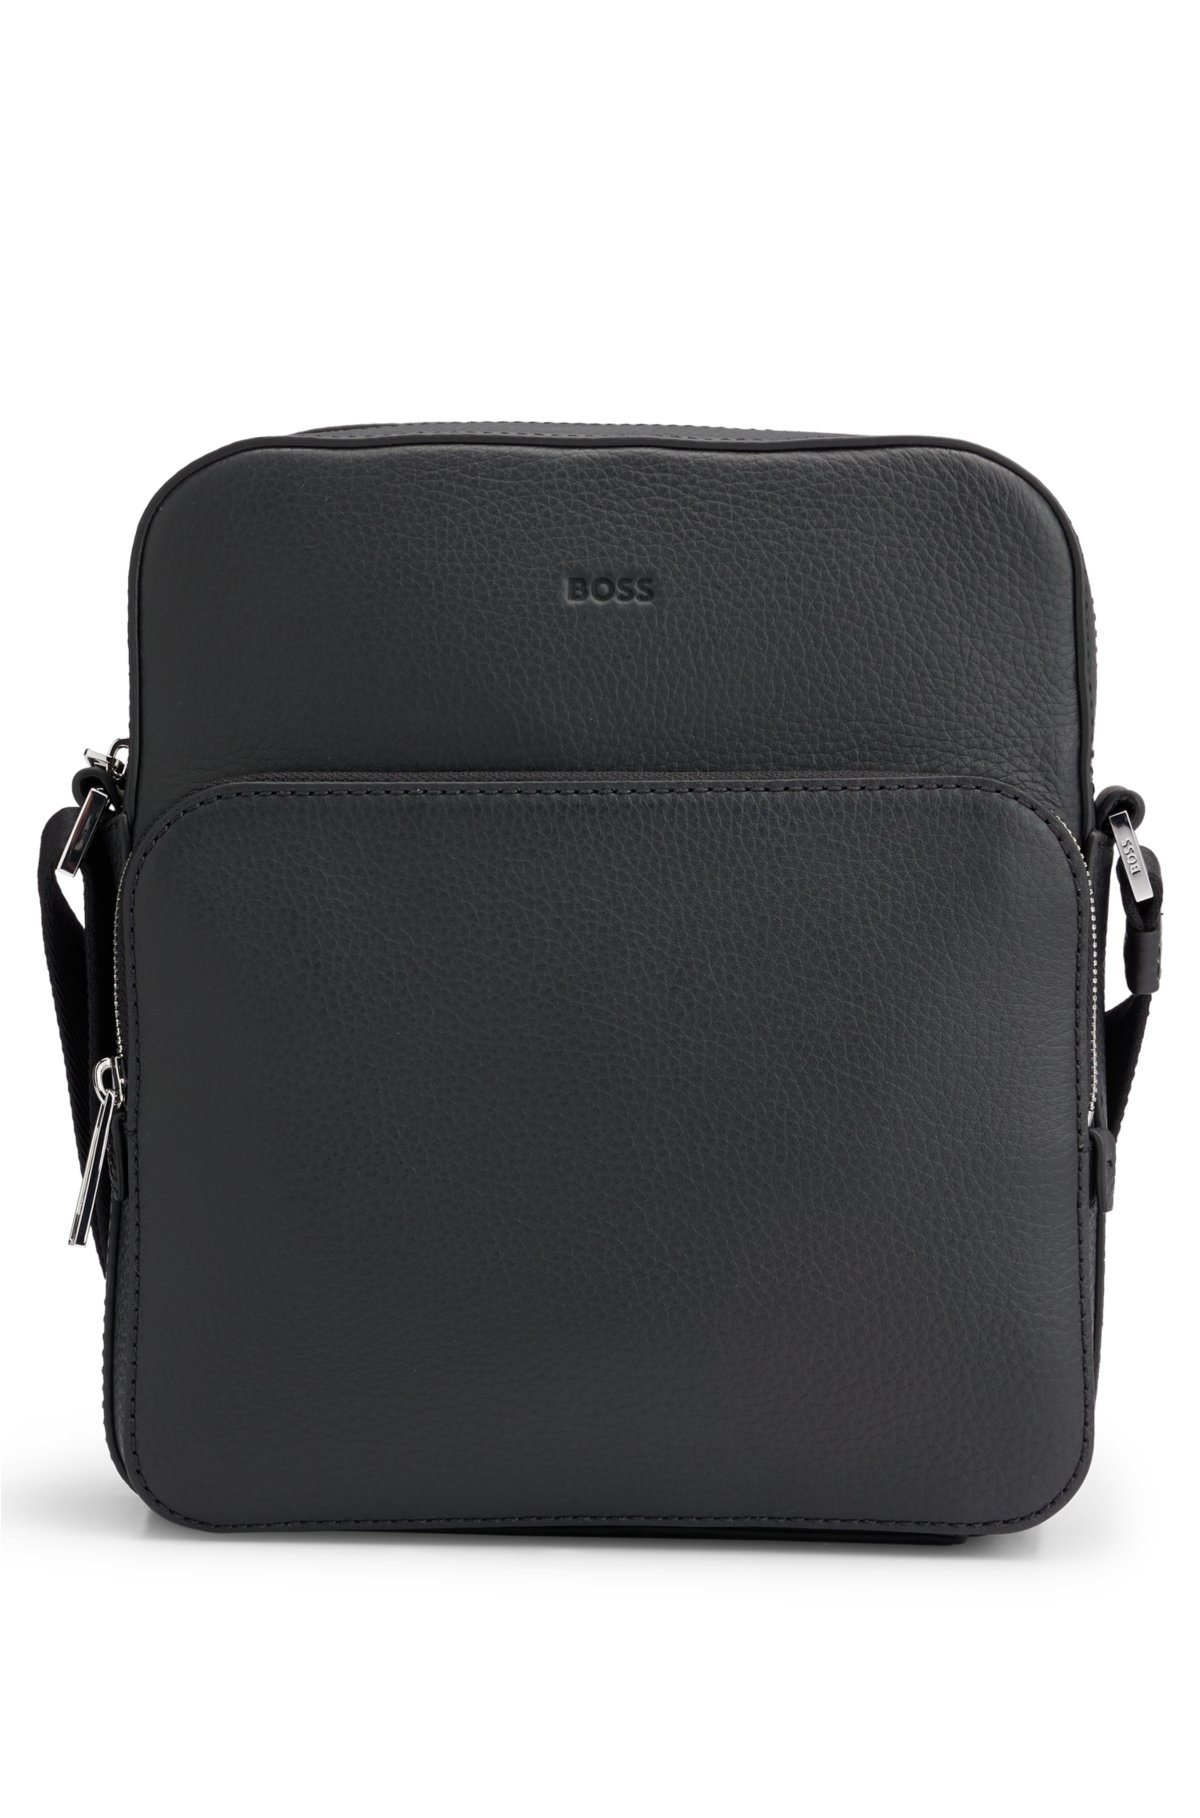 BOSS - Italian-leather reporter bag with embossed logo